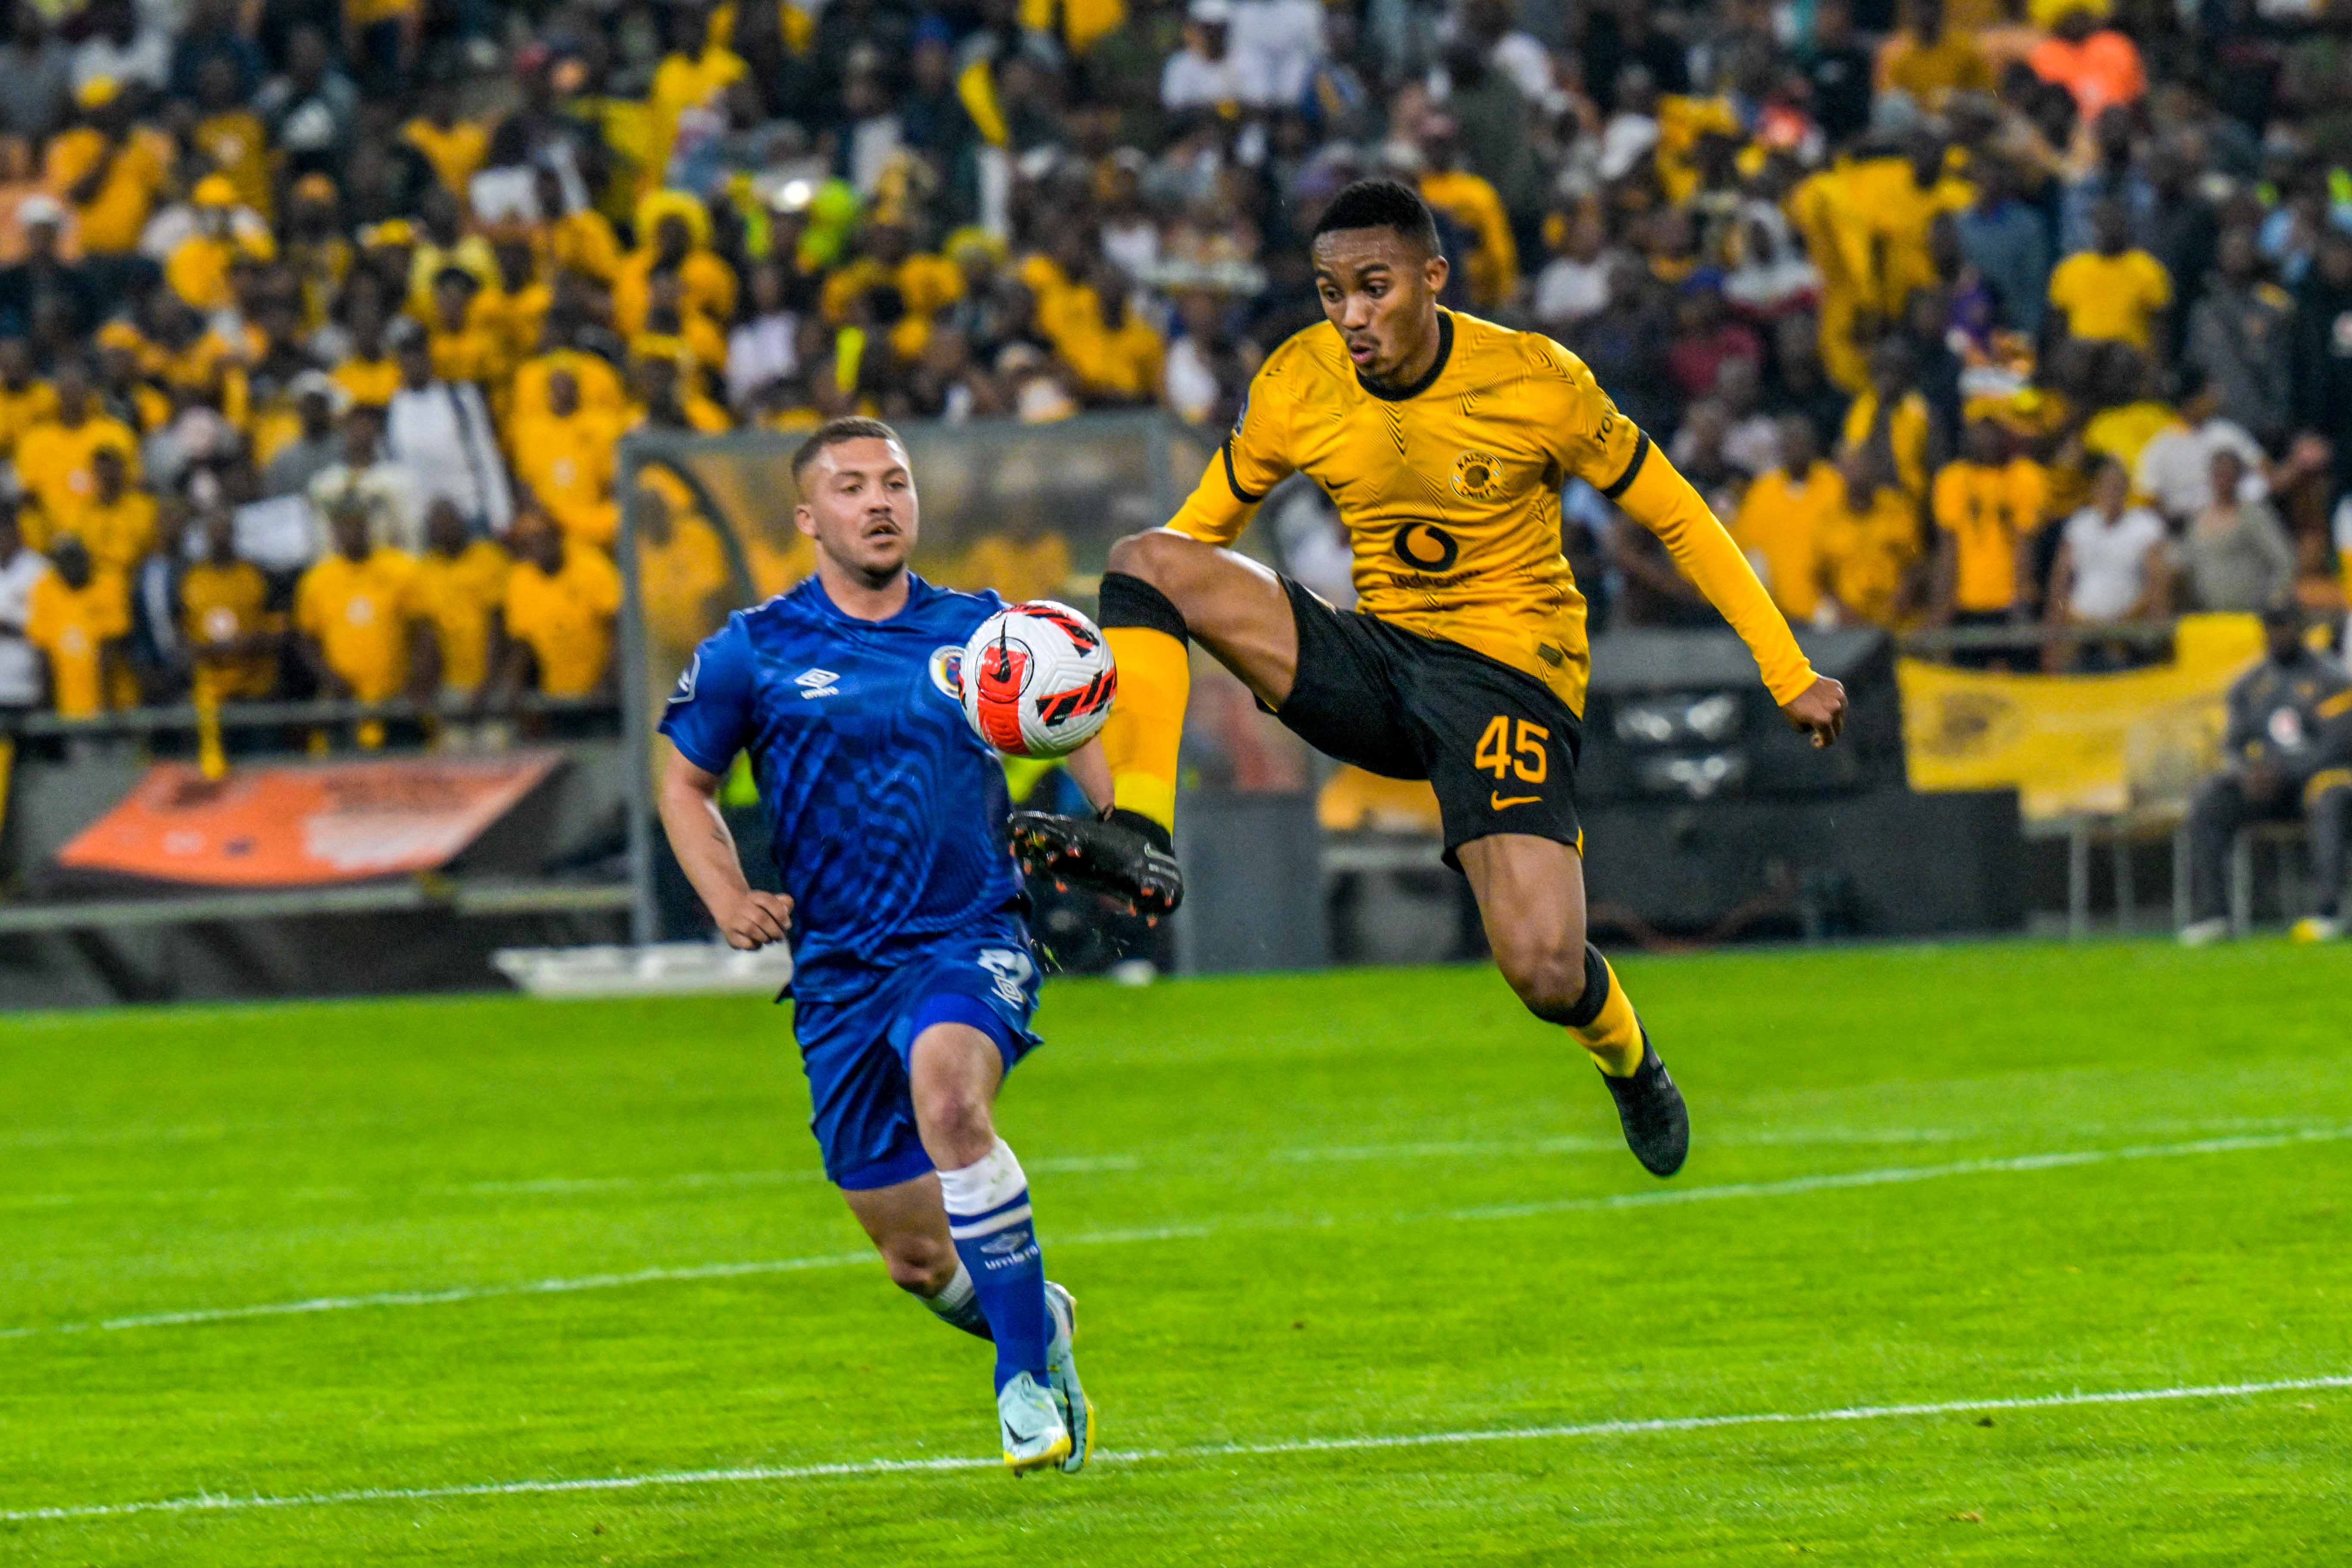 Kaizer Chiefs Midfielder Njabulo Blom defending the ball during the Dstv Premier match against SuperSport United at FNB Stadium